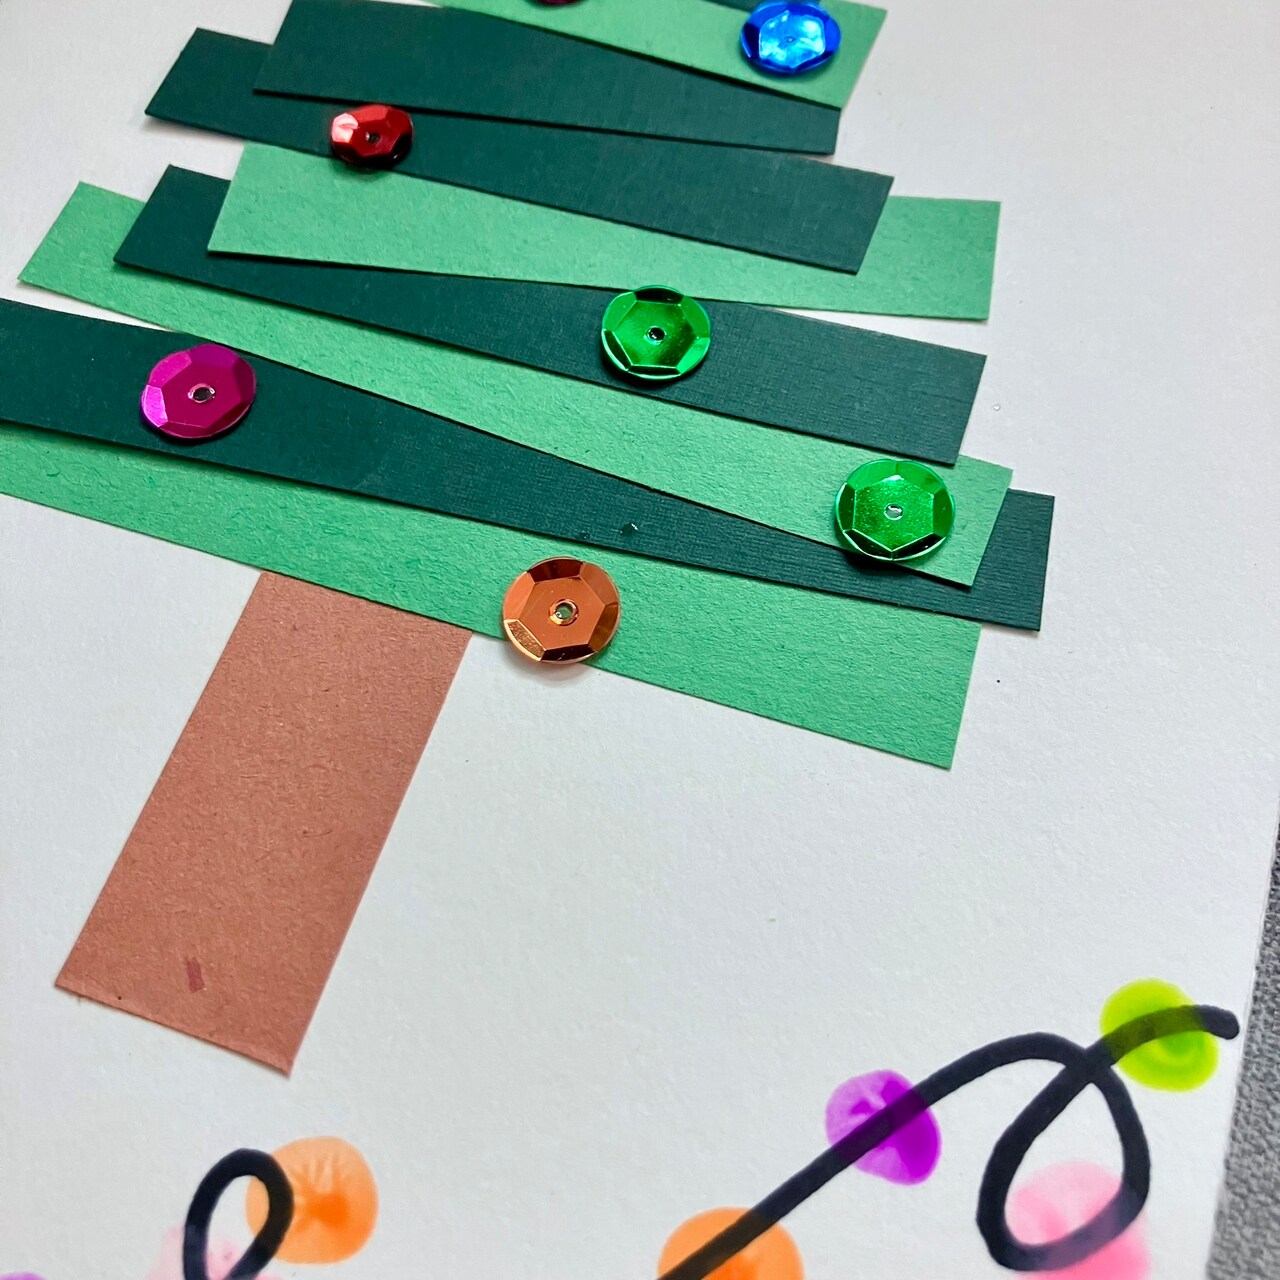 12 Days of Card Making: Christmas Tree Card for Kids